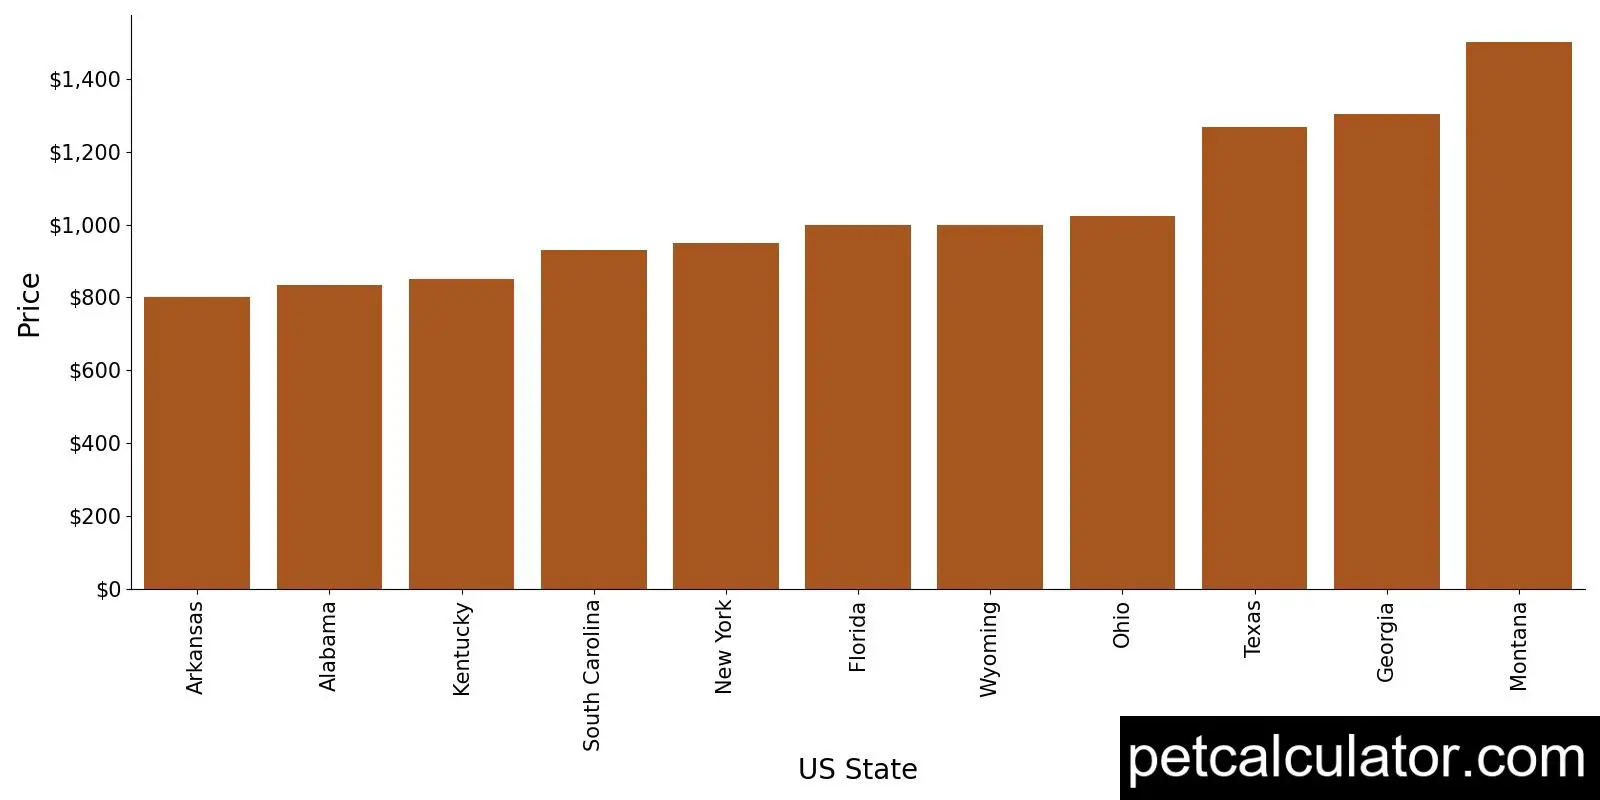 Price of Boykin Spaniel by US State 